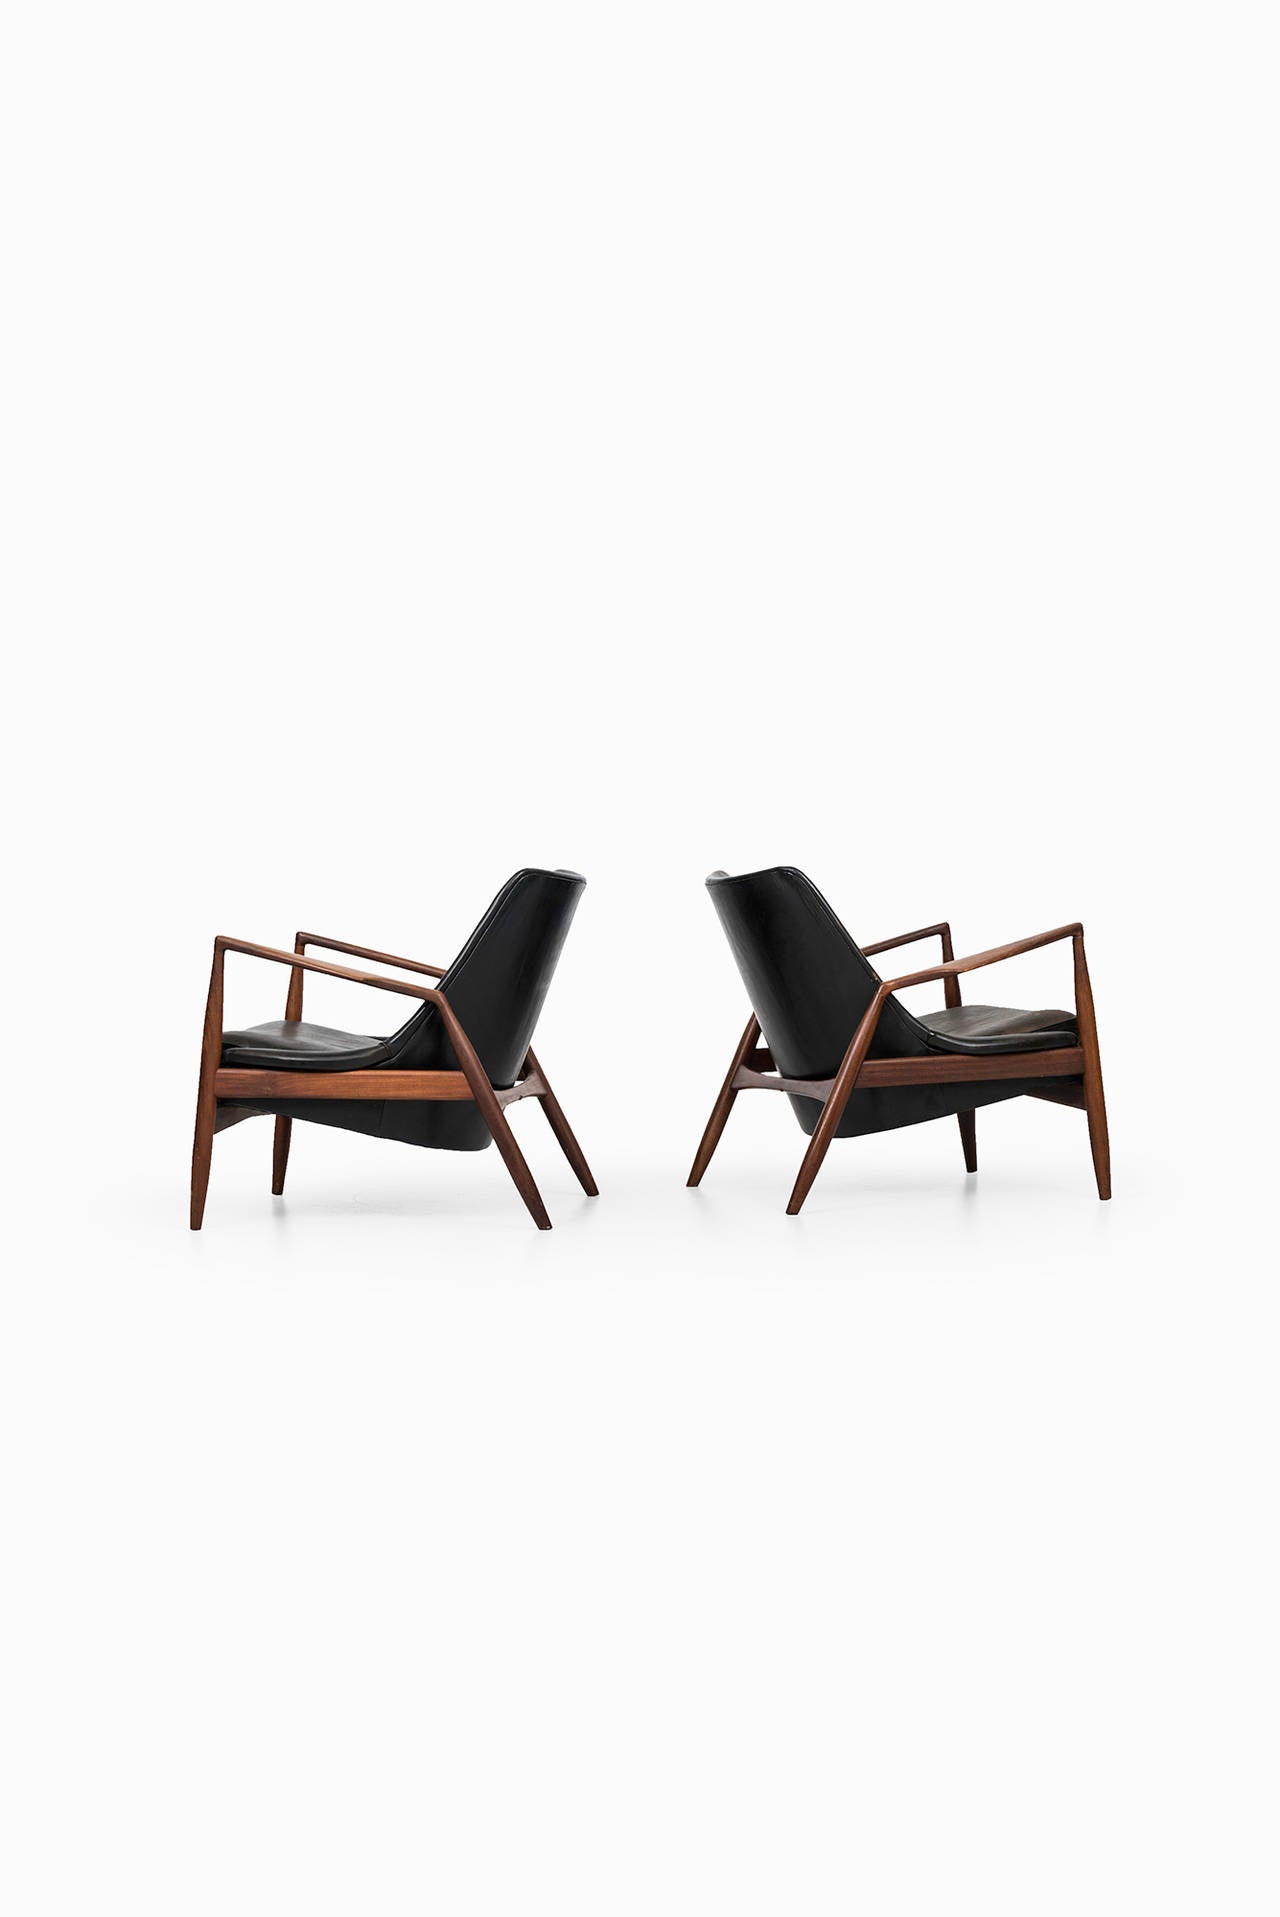 Leather Ib Kofod-Larsen Seal Easy Chairs by OPE in Sweden